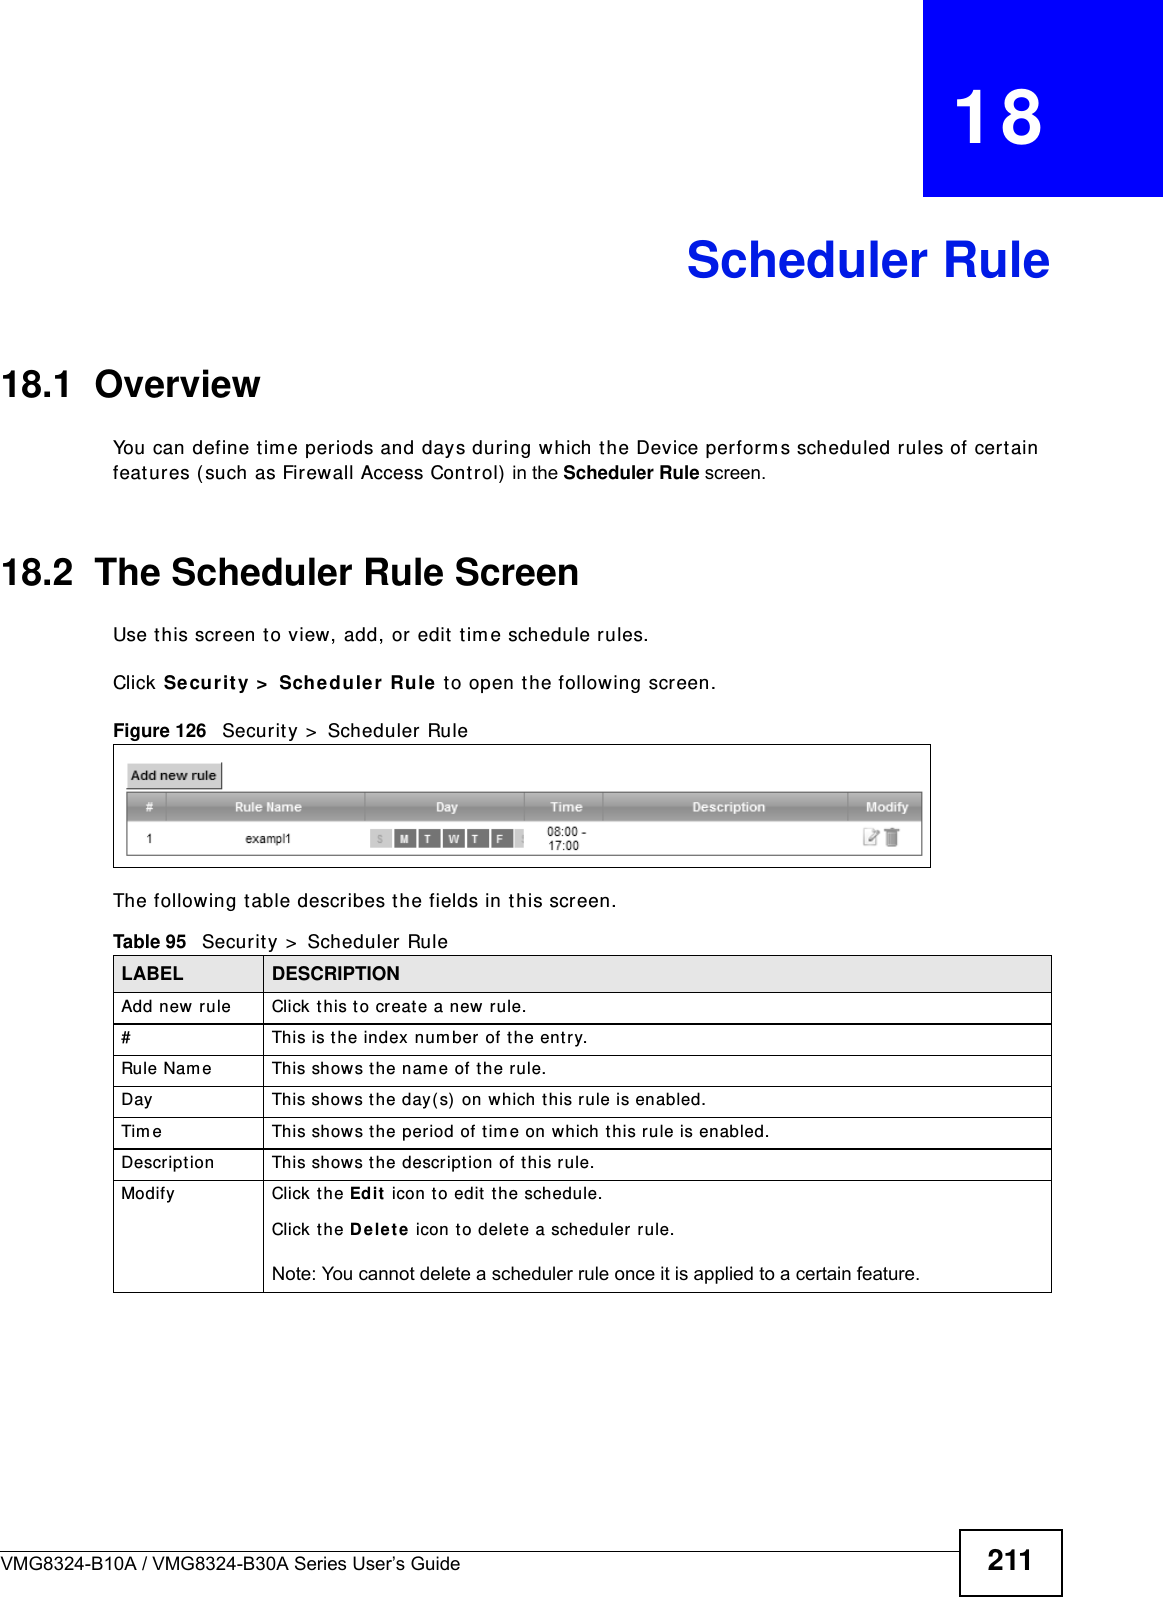 VMG8324-B10A / VMG8324-B30A Series User’s Guide 211CHAPTER   18Scheduler Rule18.1  OverviewYou can define t im e periods and days during which the Device perform s scheduled rules of cert ain feat ures ( such as Firewall Access Control)  in the Scheduler Rule screen. 18.2  The Scheduler Rule ScreenUse t his screen t o view, add, or edit tim e schedule rules.Click Security &gt;  Schedule r Rule to open the following screen. Figure 126   Securit y &gt;  Scheduler Rule The following t able describes the fields in this screen. Table 95   Secur ity &gt;  Scheduler RuleLABEL DESCRIPTIONAdd new rule Click this t o cr eate a new rule.#This is t he index num ber of the ent r y.Rule Nam e This shows the nam e of the rule.Day This shows the day(s)  on which this rule is enabled.Tim e This shows the period of tim e on which this r ule is enabled.Descript ion This shows the description of t his rule.Modify Click the Edit  icon to edit  the schedule.Click t he Delete icon to delet e a scheduler  rule.Note: You cannot delete a scheduler rule once it is applied to a certain feature.